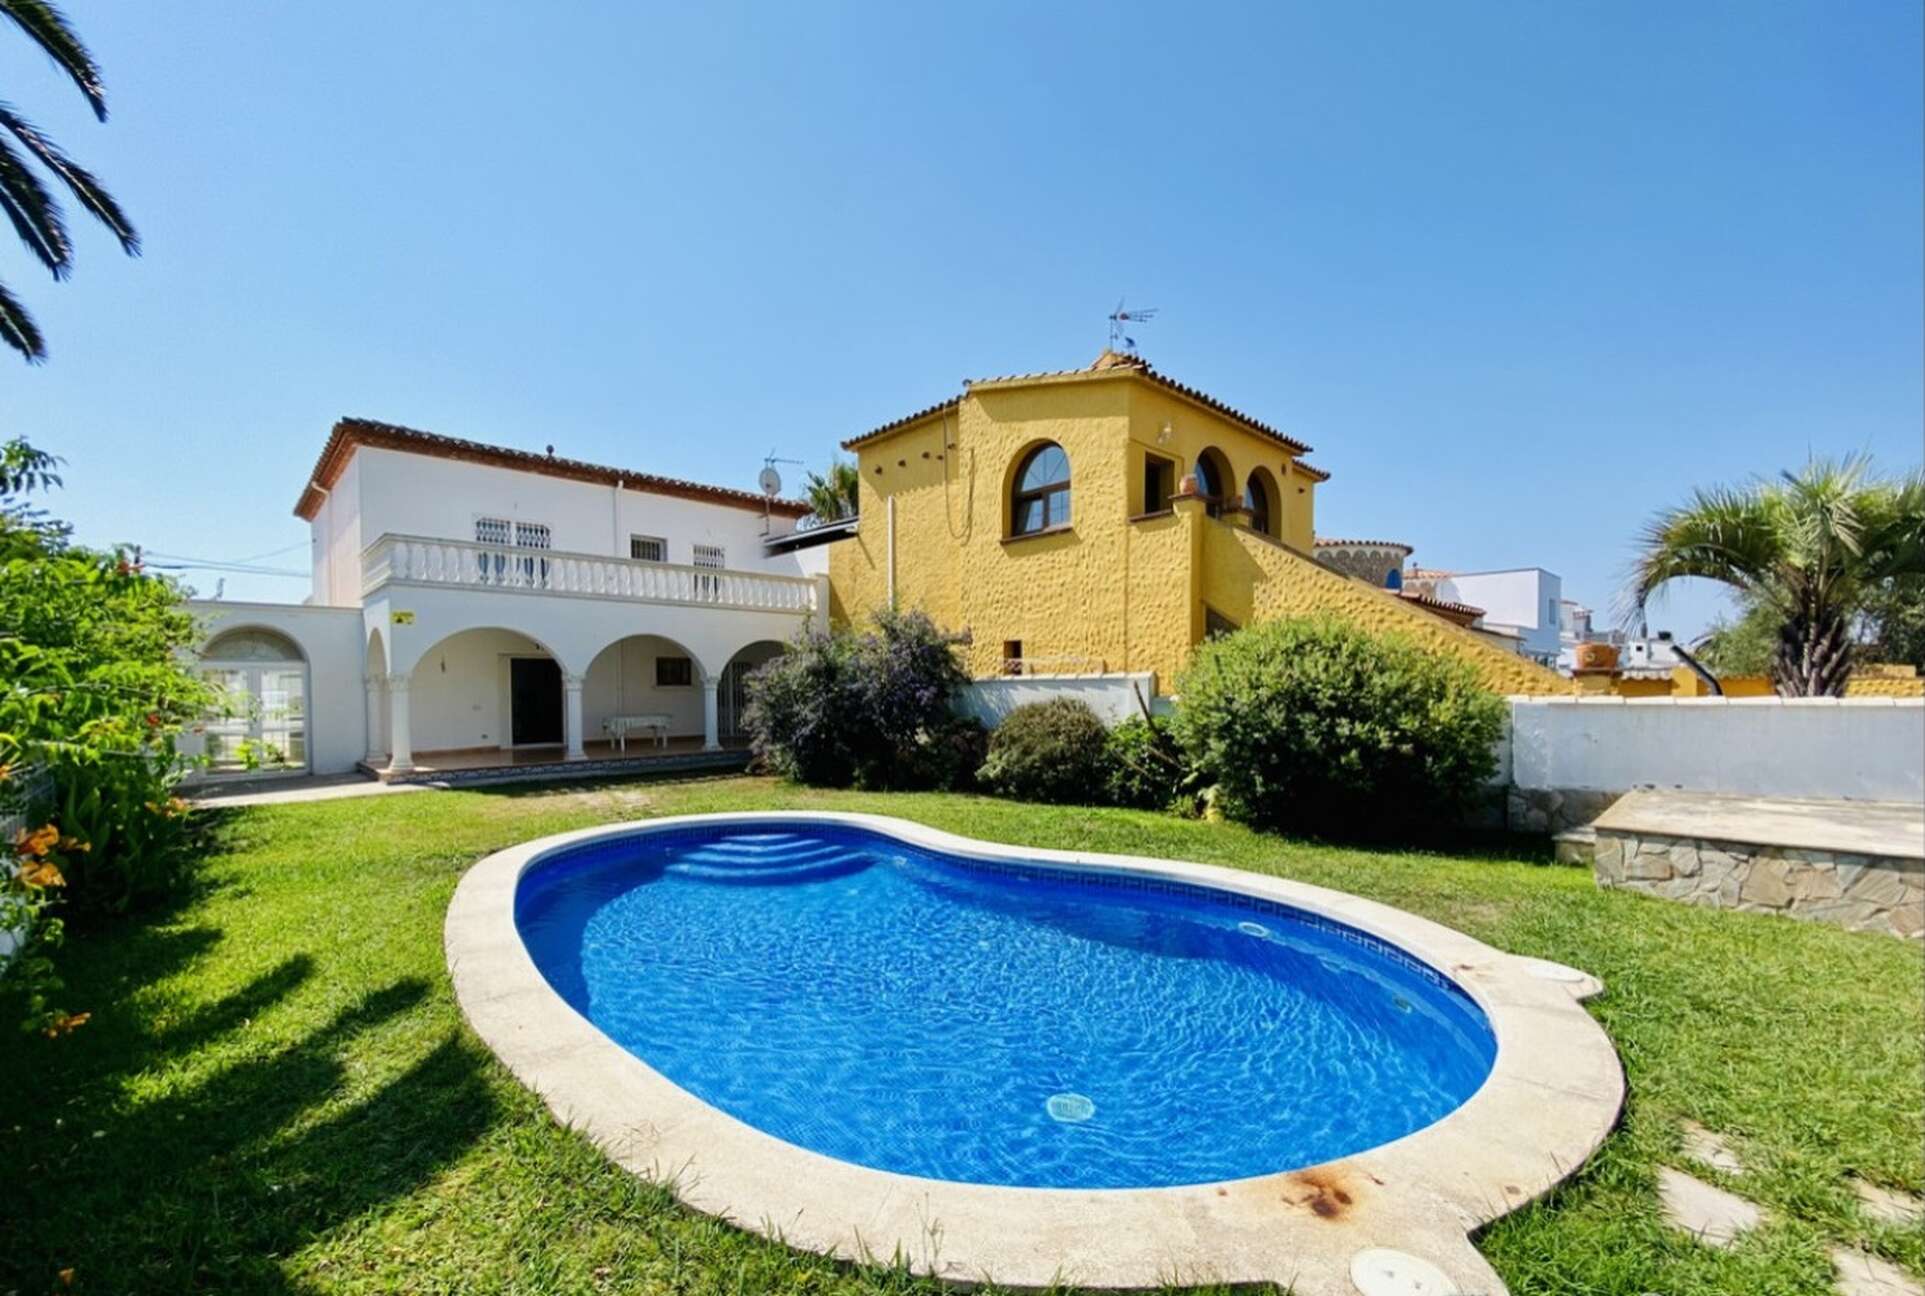 House for sale with mooring and 7 bedrooms in Empuriabrava